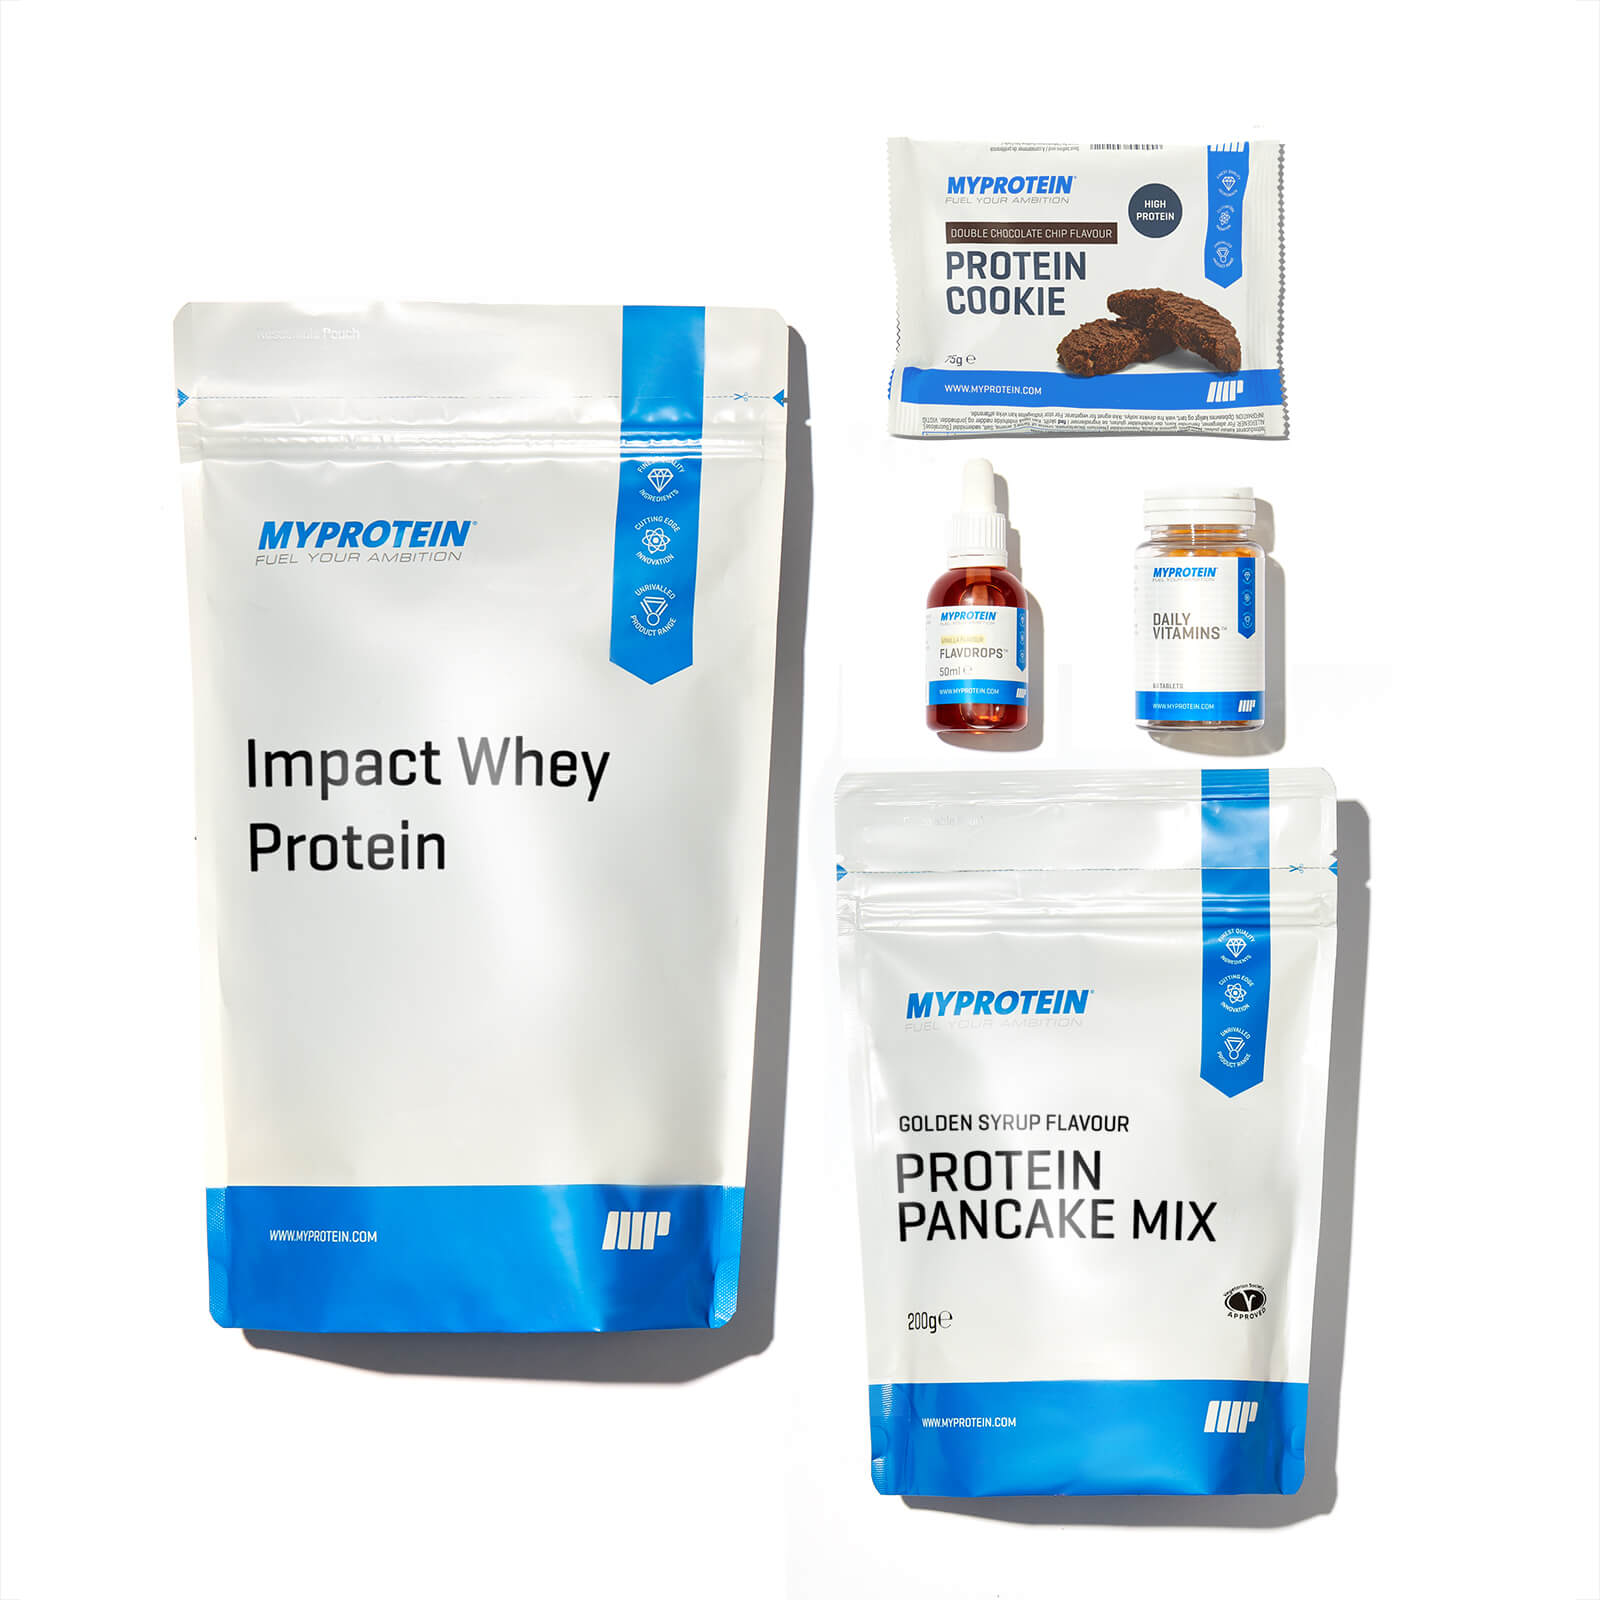 Myprotein App Weight Loss Bundle - Cookies and Cream - Vanilla - Cookies and Cream